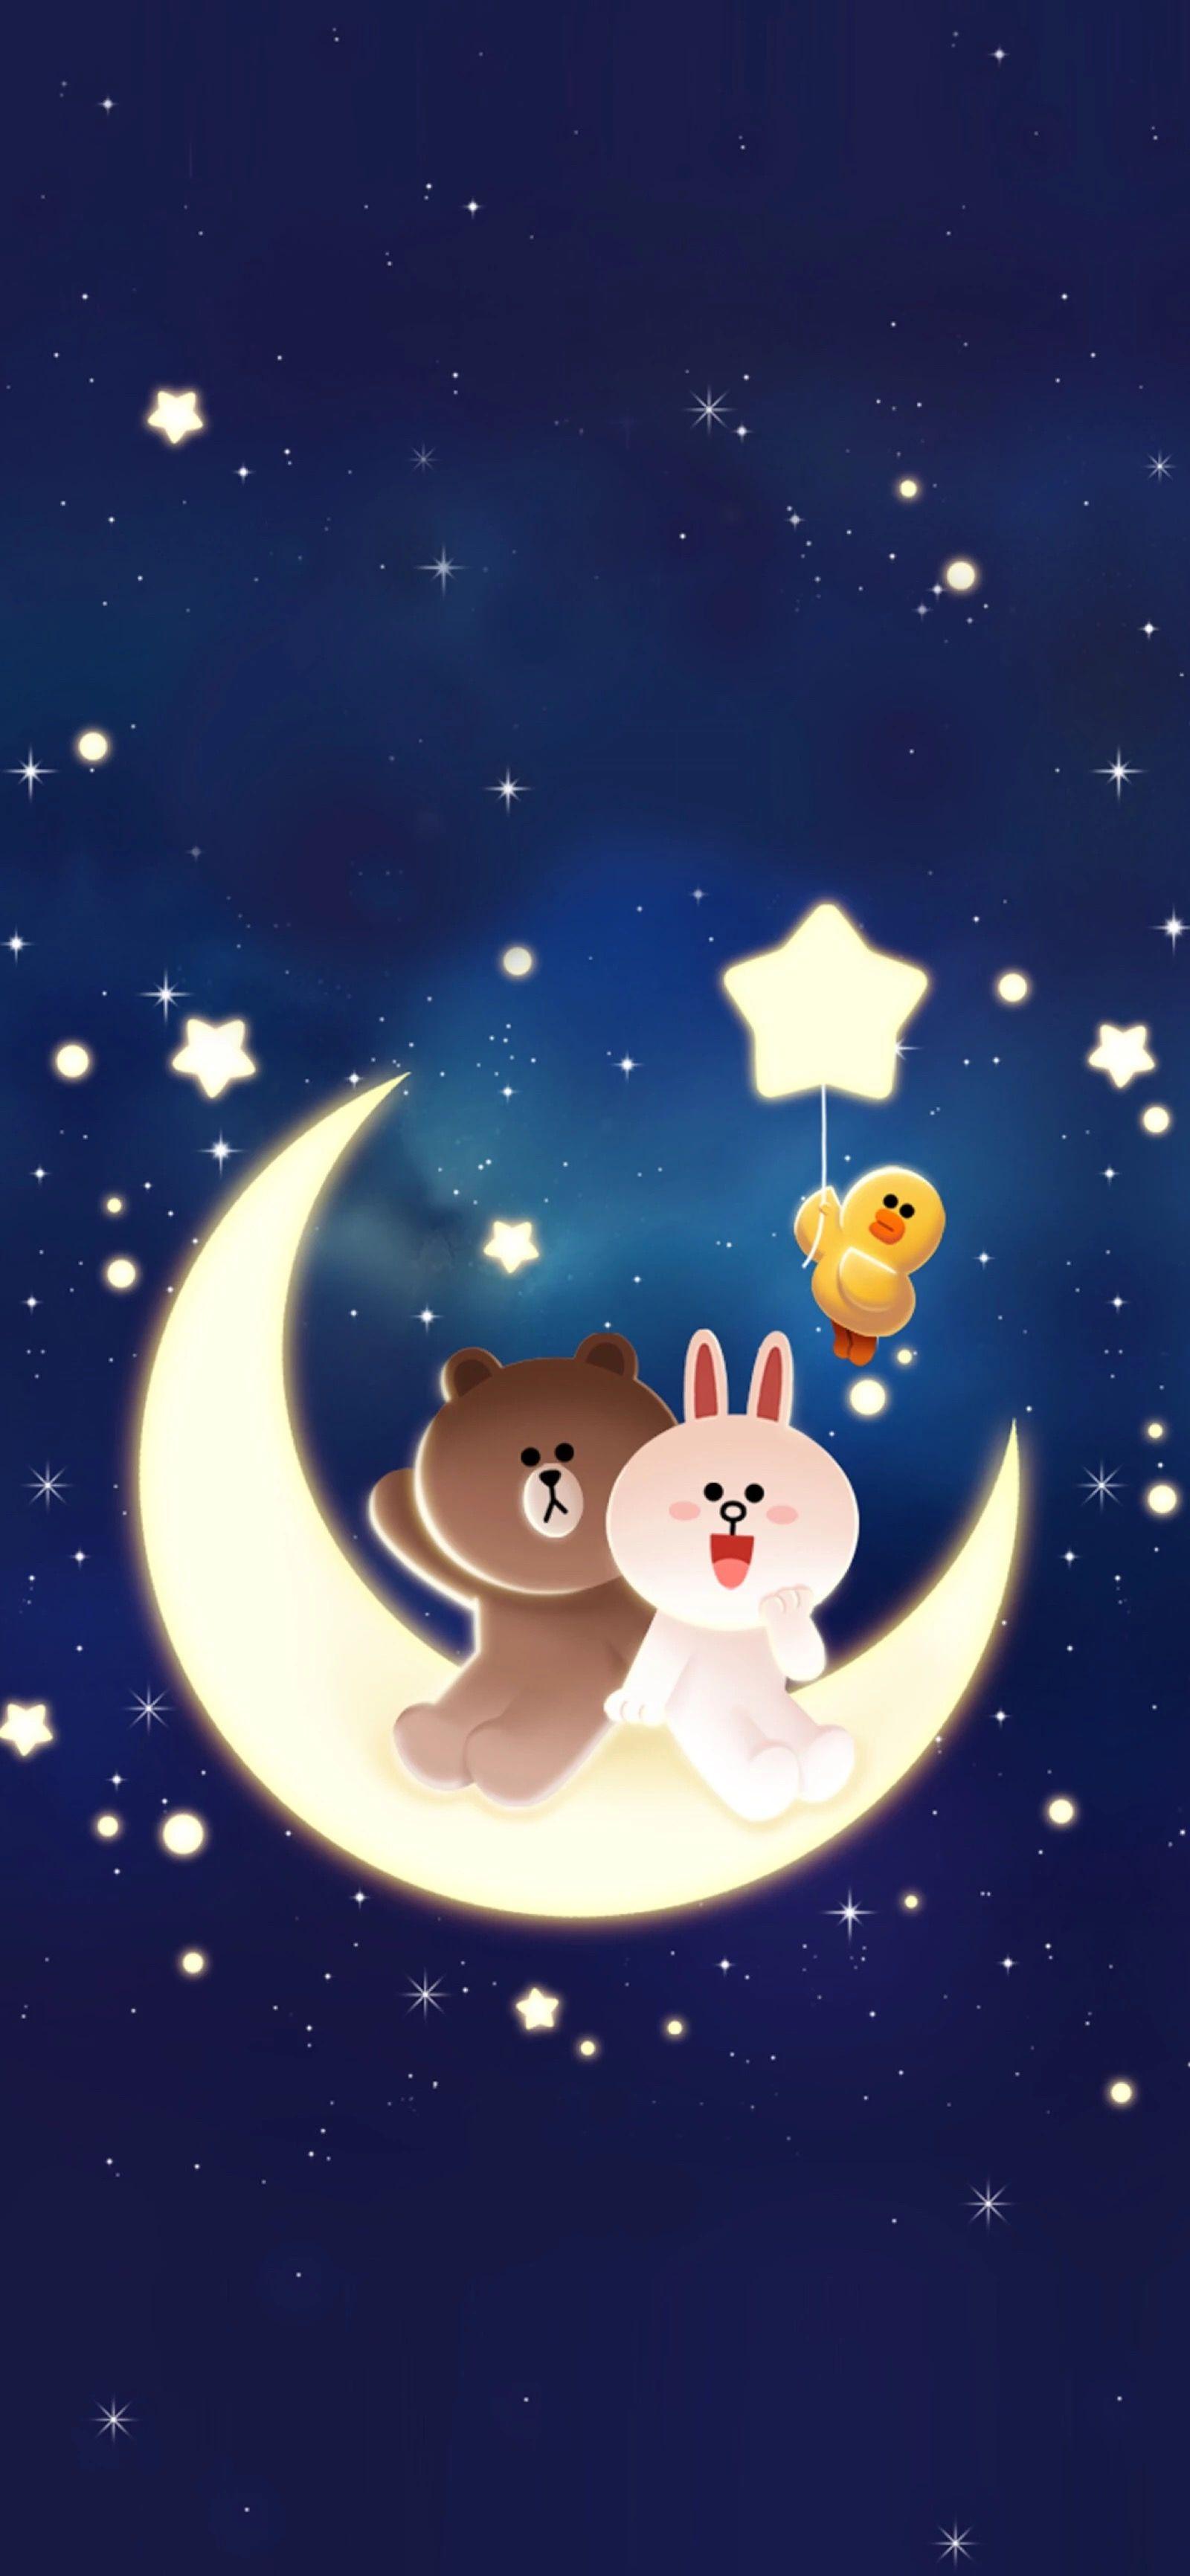 Best Cony ❤️ Brown image. Cony brown, Line